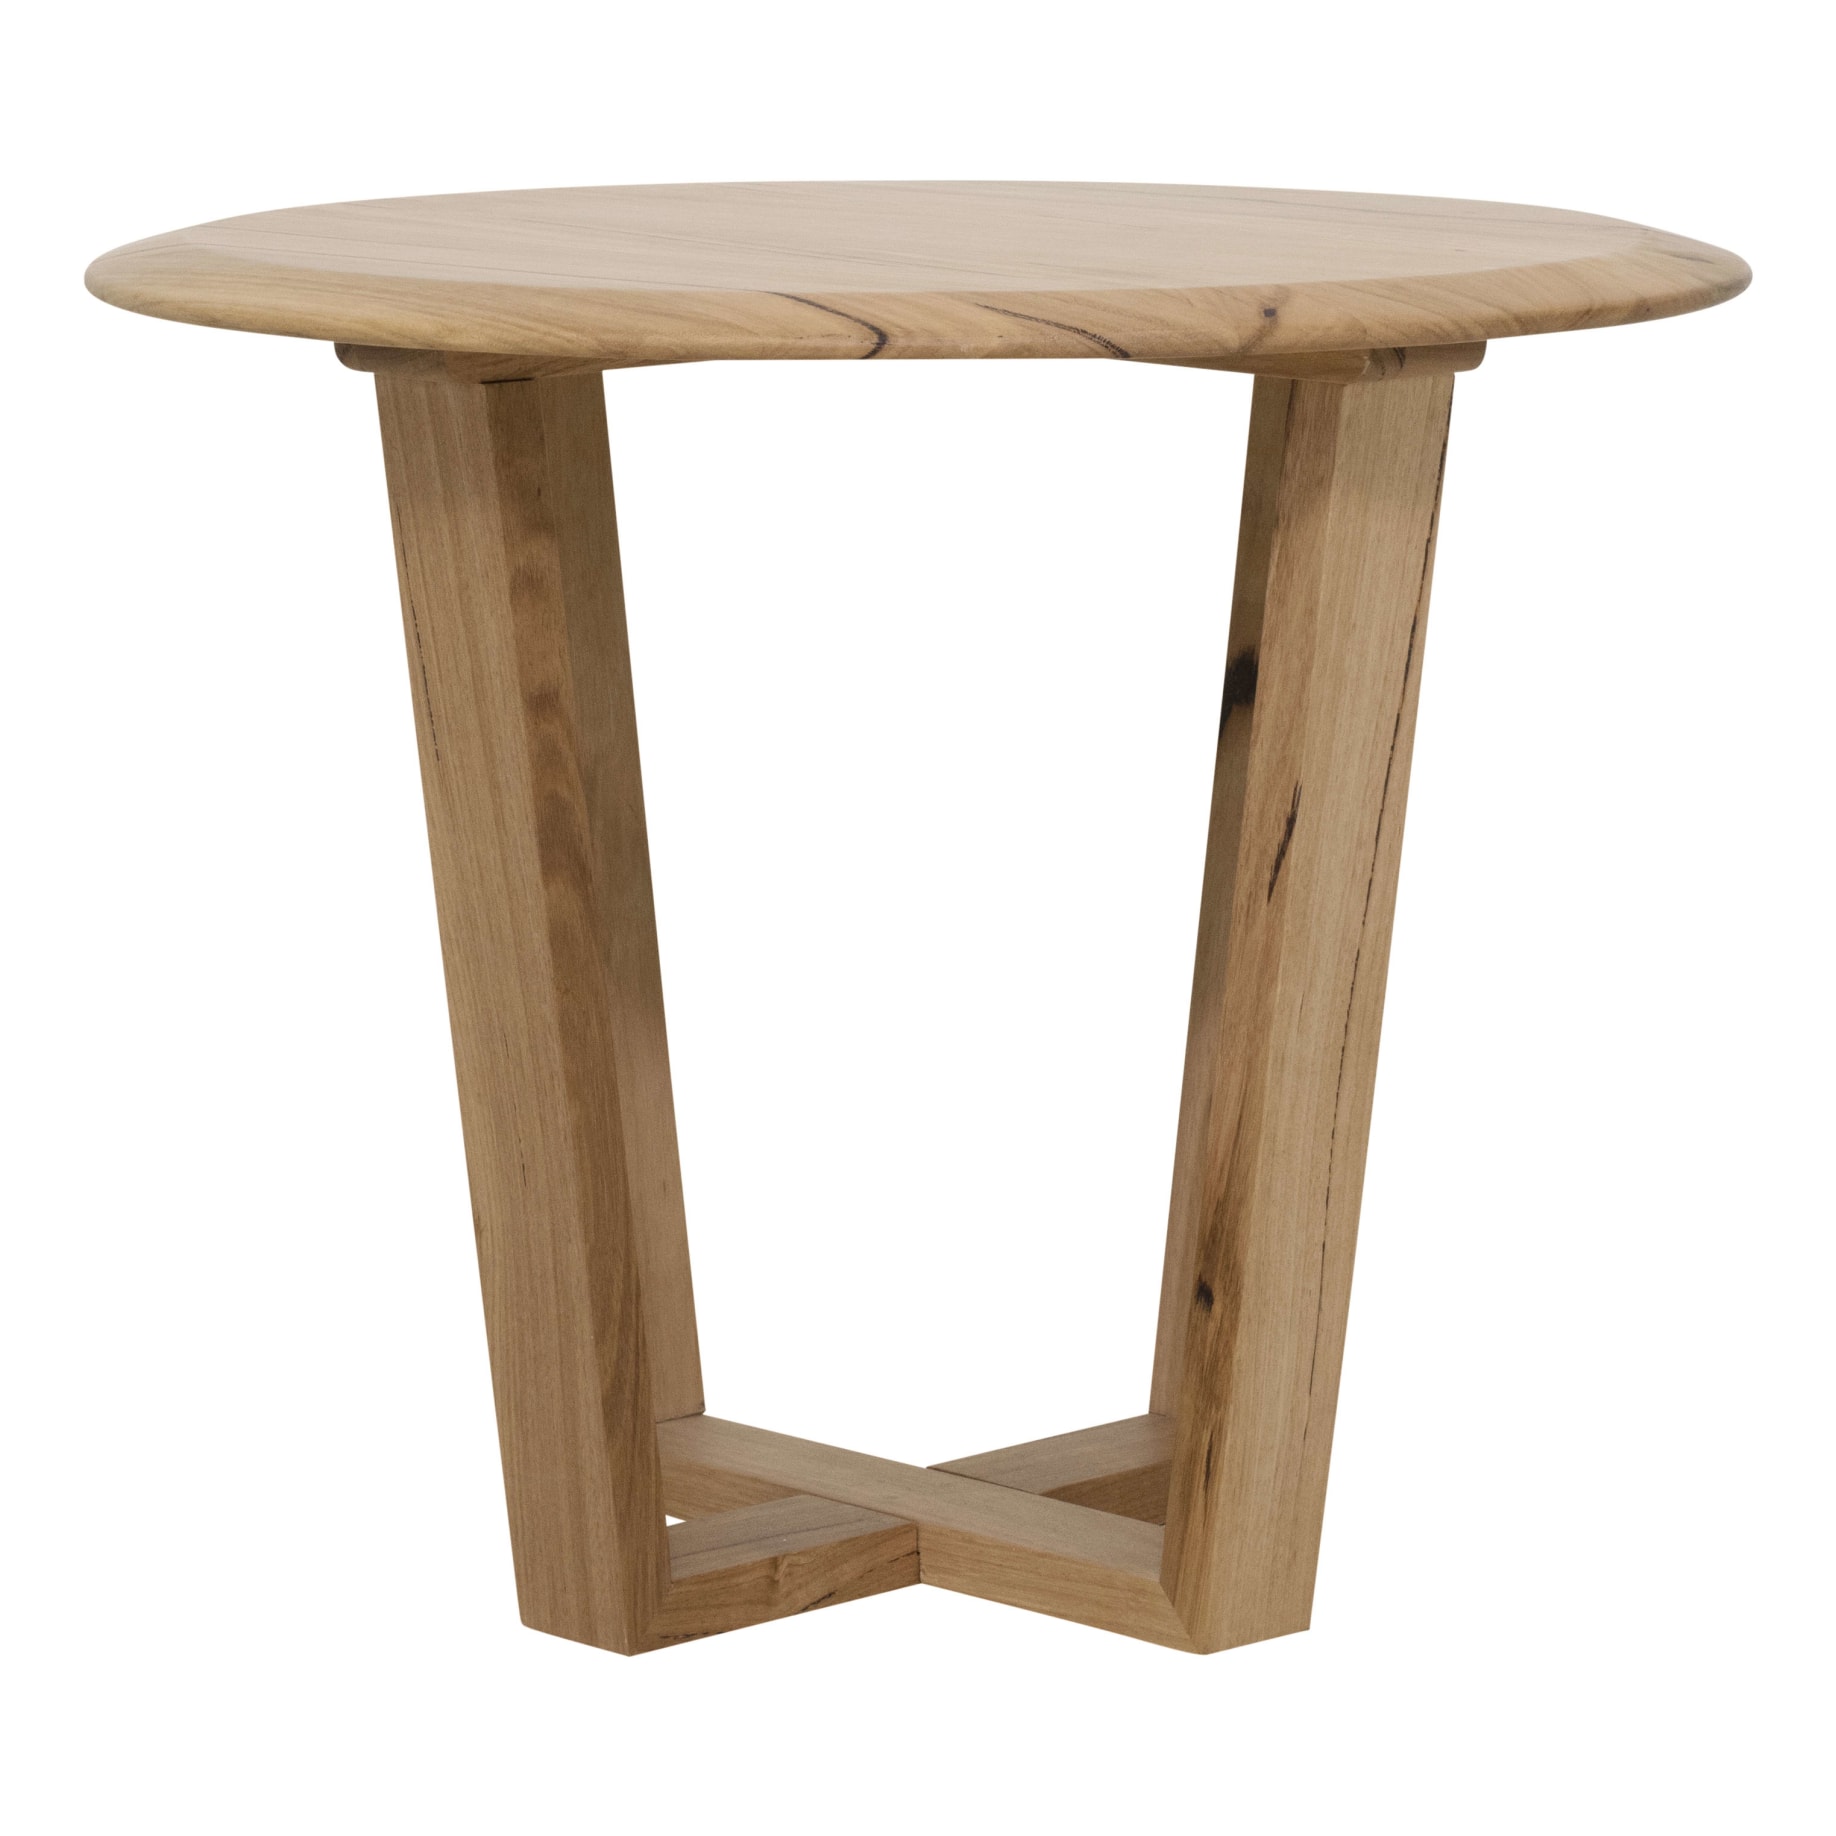 Baxter Round Side Table in Australian Messmate